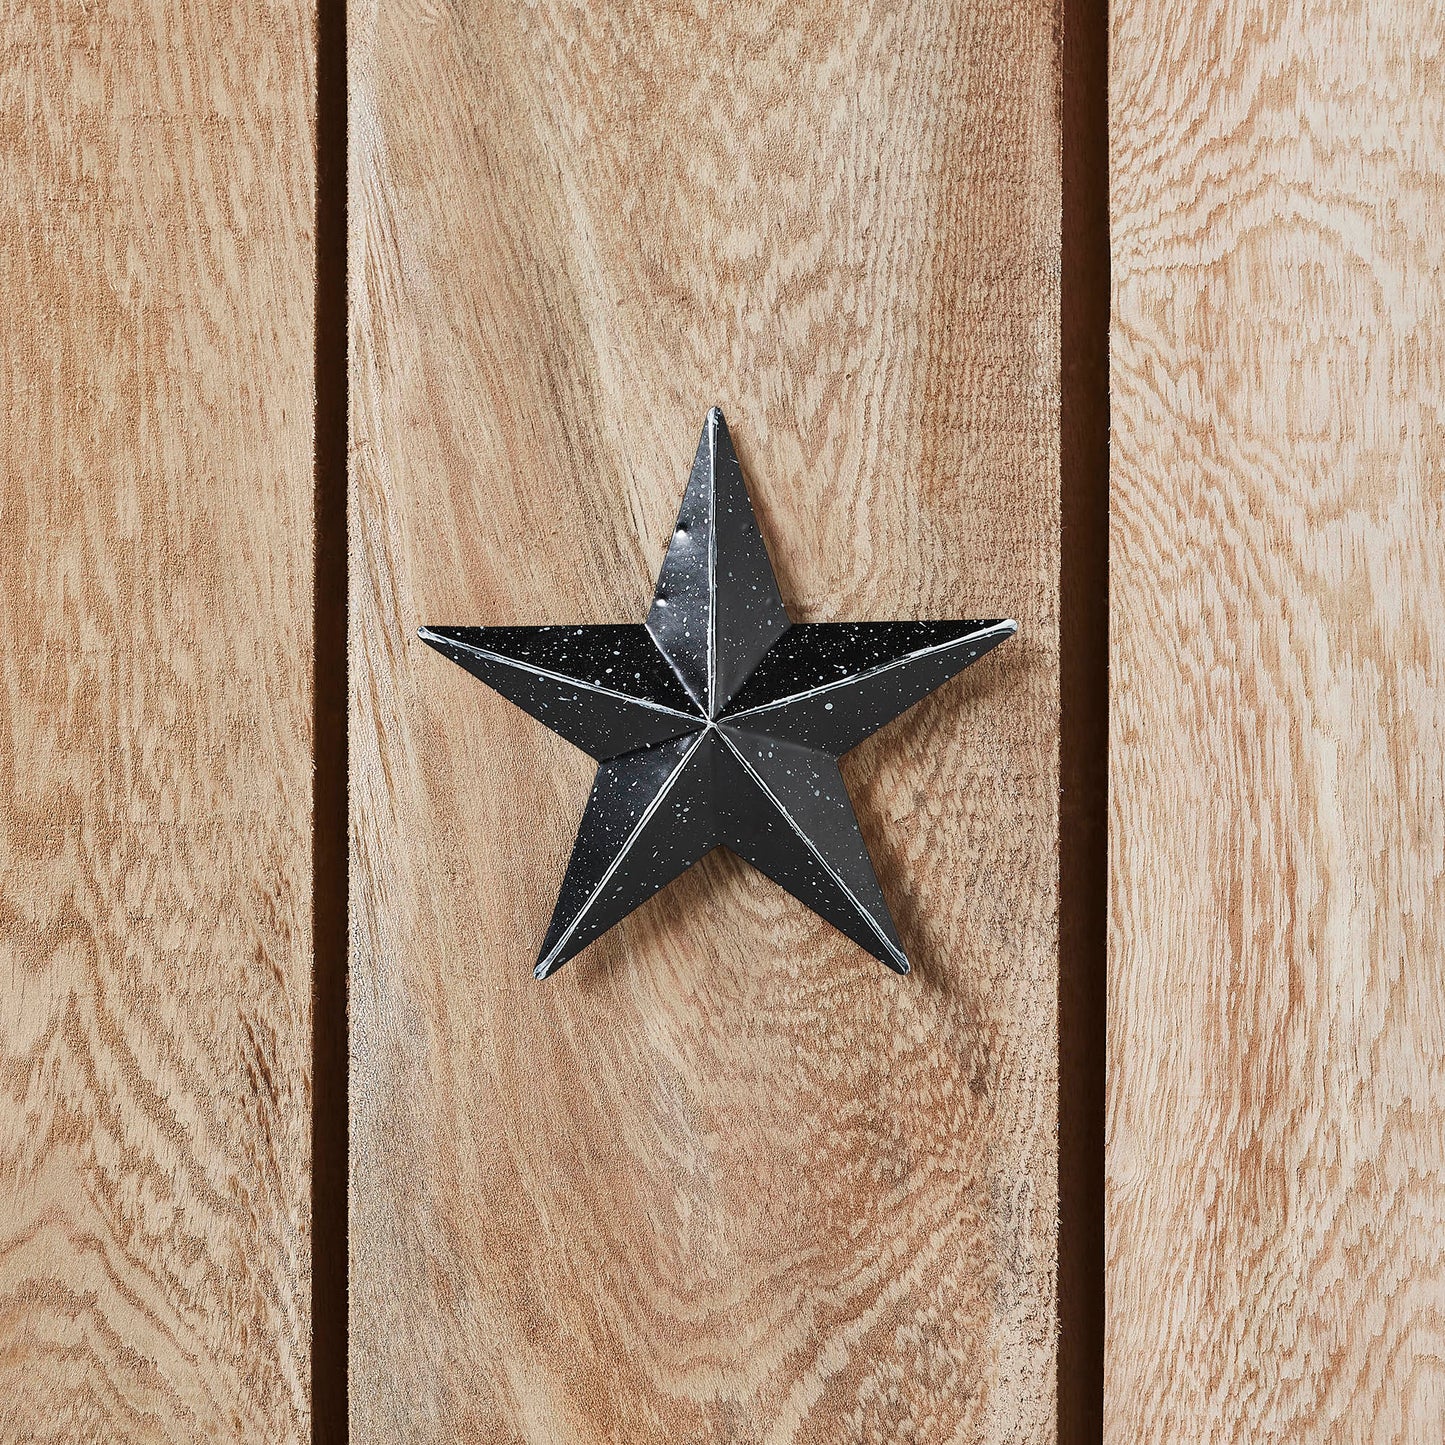 VHC Brands Patriotic Faceted Metal Star Black Wall Hanging 4x4, Independence Day Decor, American Star Design, Distressed Appearance Metal Wall Hanging,  Star Shape, Country, Charcoal Black